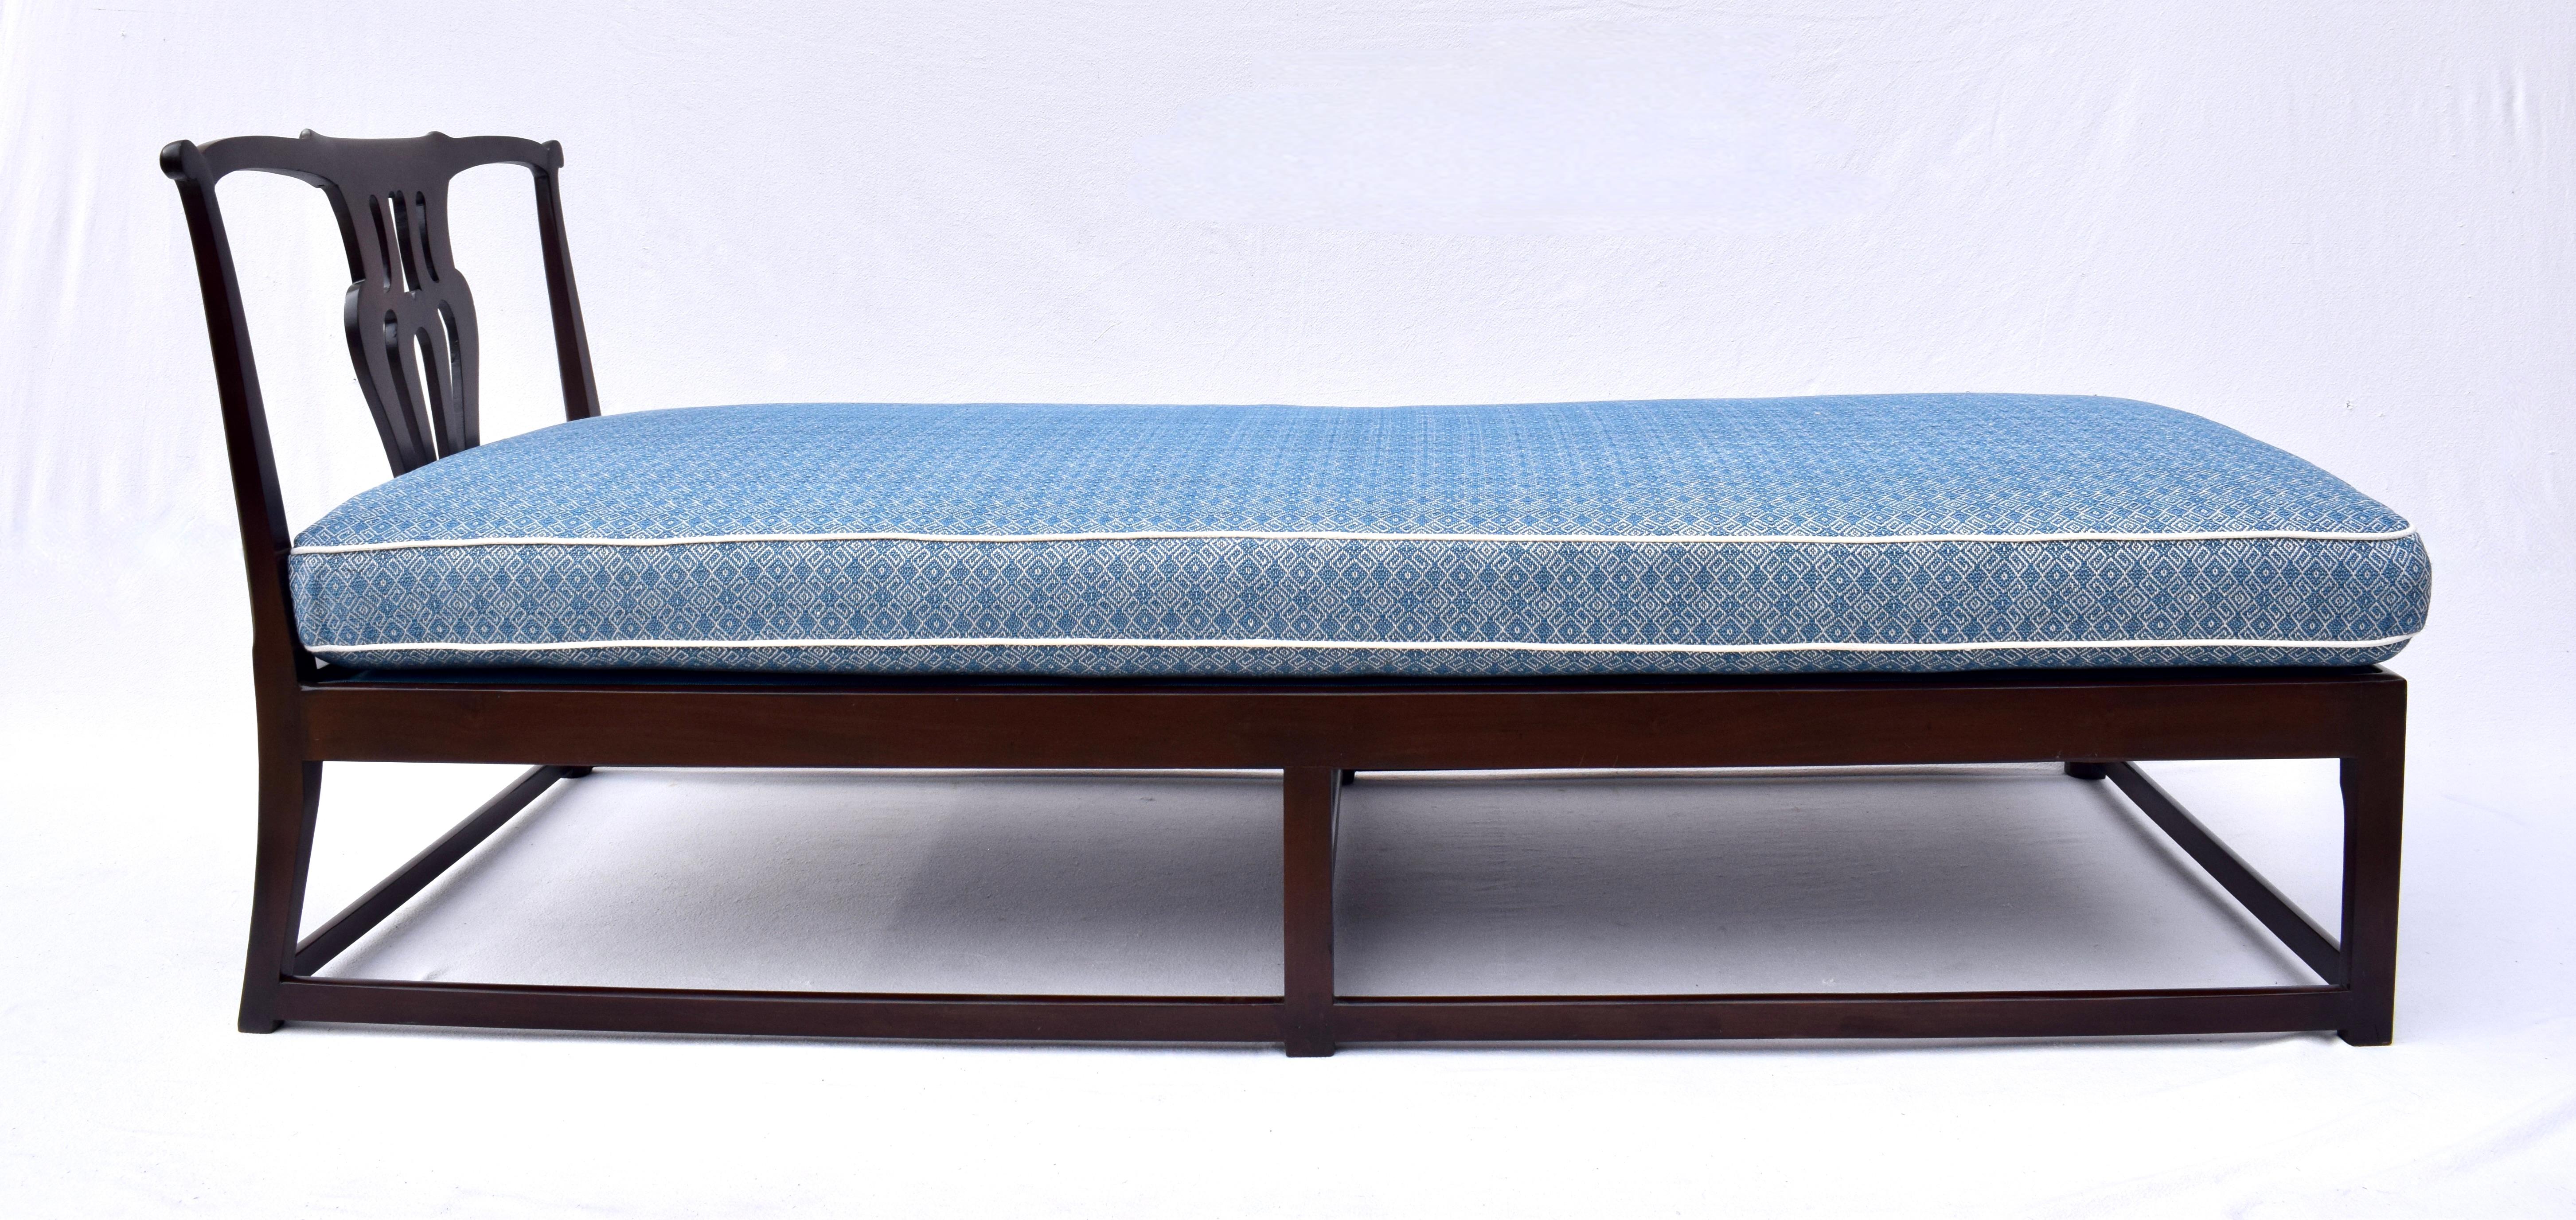 An exquisite English Chippendale style (early 19th Cent) Mahogany daybed with open carved crest rail & splat having new custom blue & white woven upholstery. Fully restored & refinished in excellent vintage condition. An especially transitional